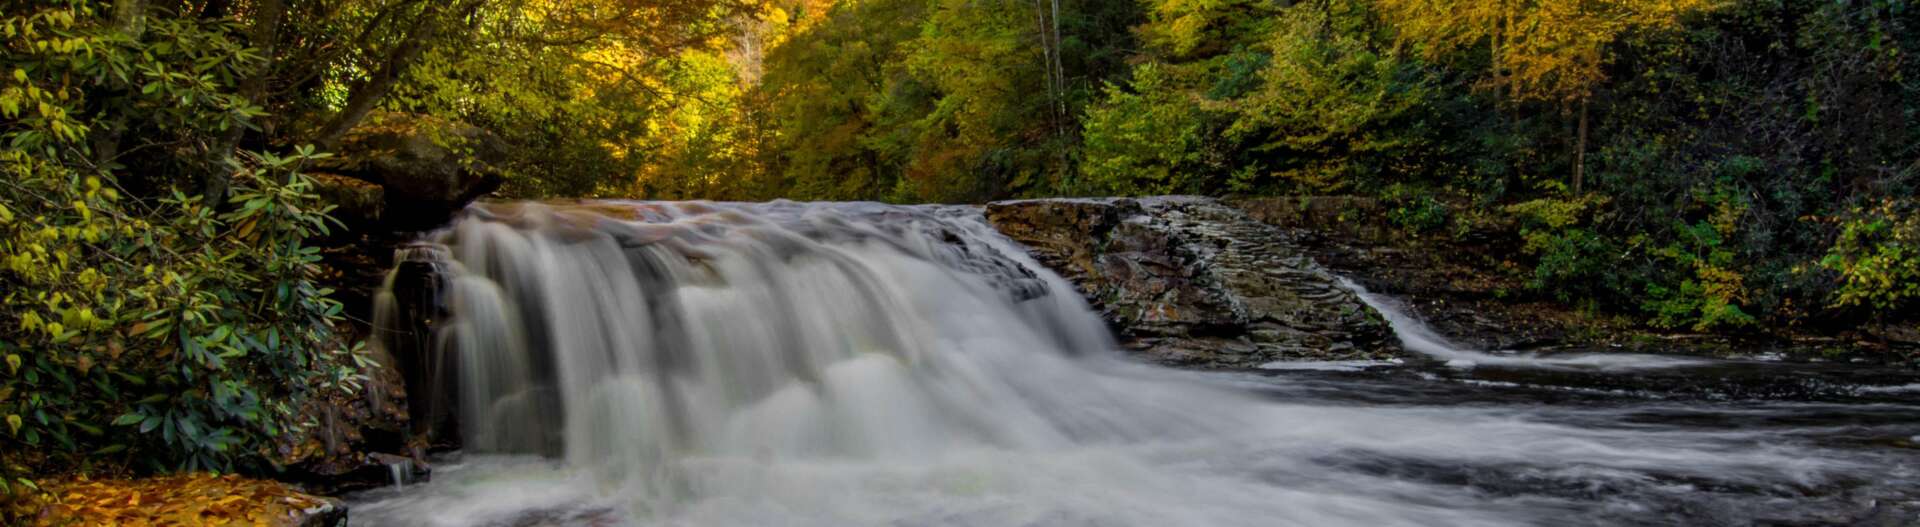 Eleven Fall Must Do’s for Getting Tuckered in Tucker County, WV.